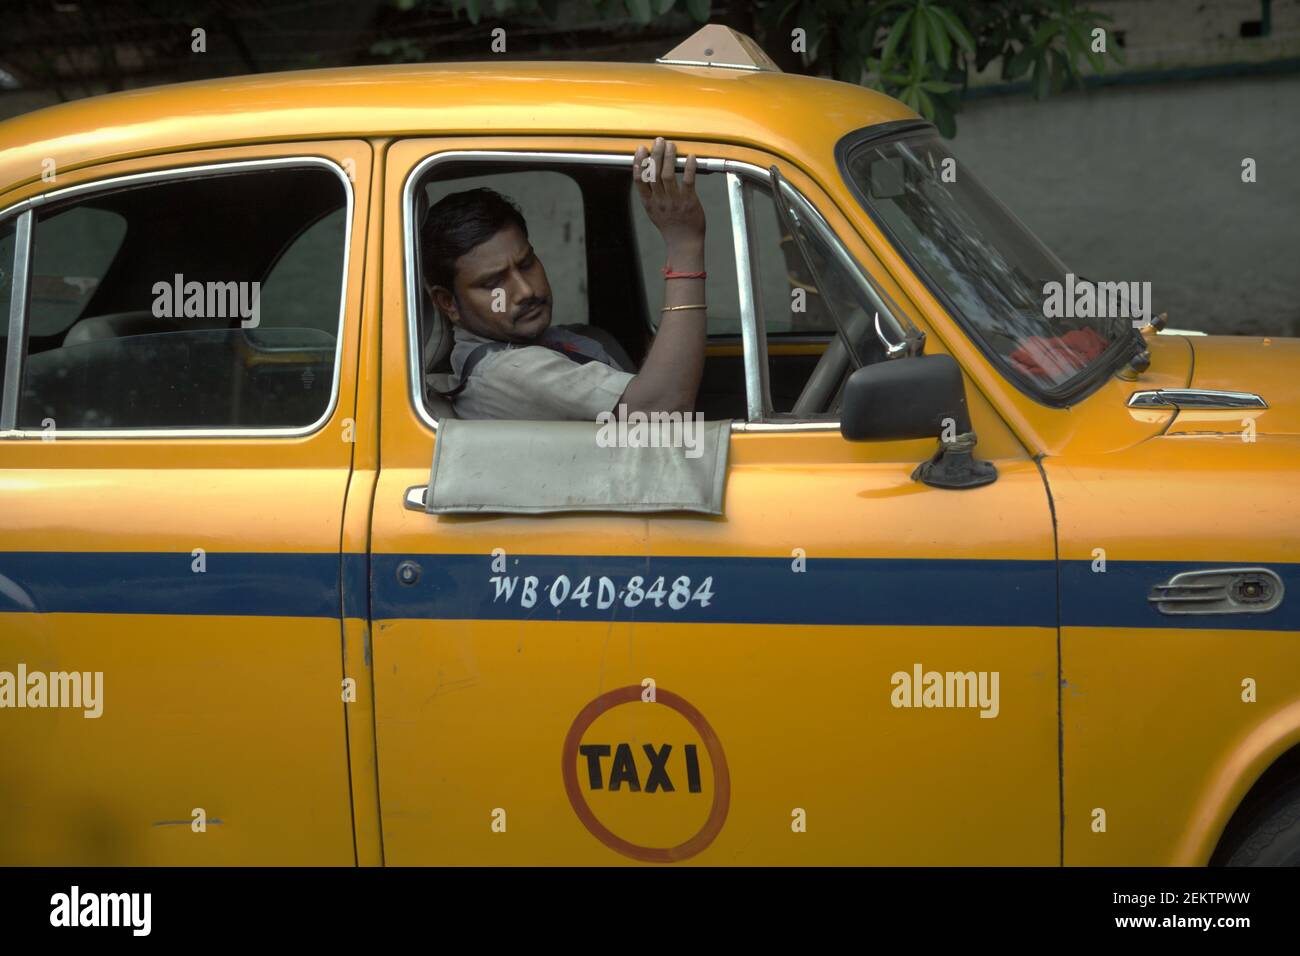 Portrait of a yellow taxi driver during a traffic congestion in Kolkata, West Bengal, India (2013).   Kolkata's yellow taxis are lately 'hardly visible on the streets' of the city, according to a publication by 'Kolkata on Wheels', a monthly motoring and lifestyle magazine. Stock Photo